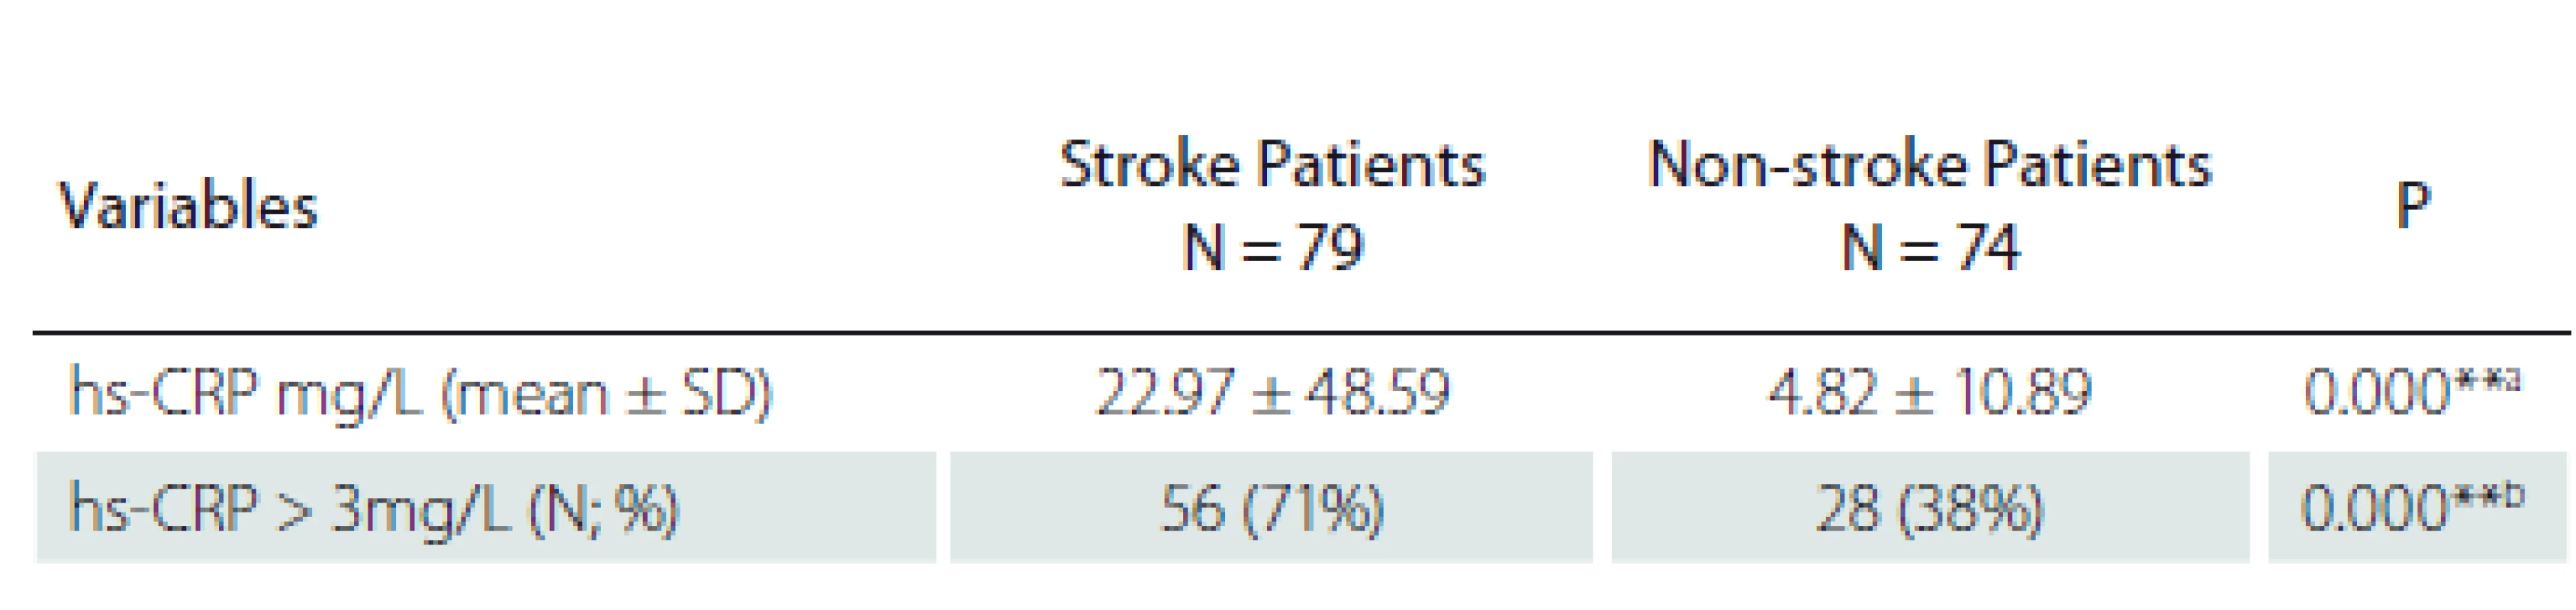 Hs-CRP levels in stroke and non-stroke patients